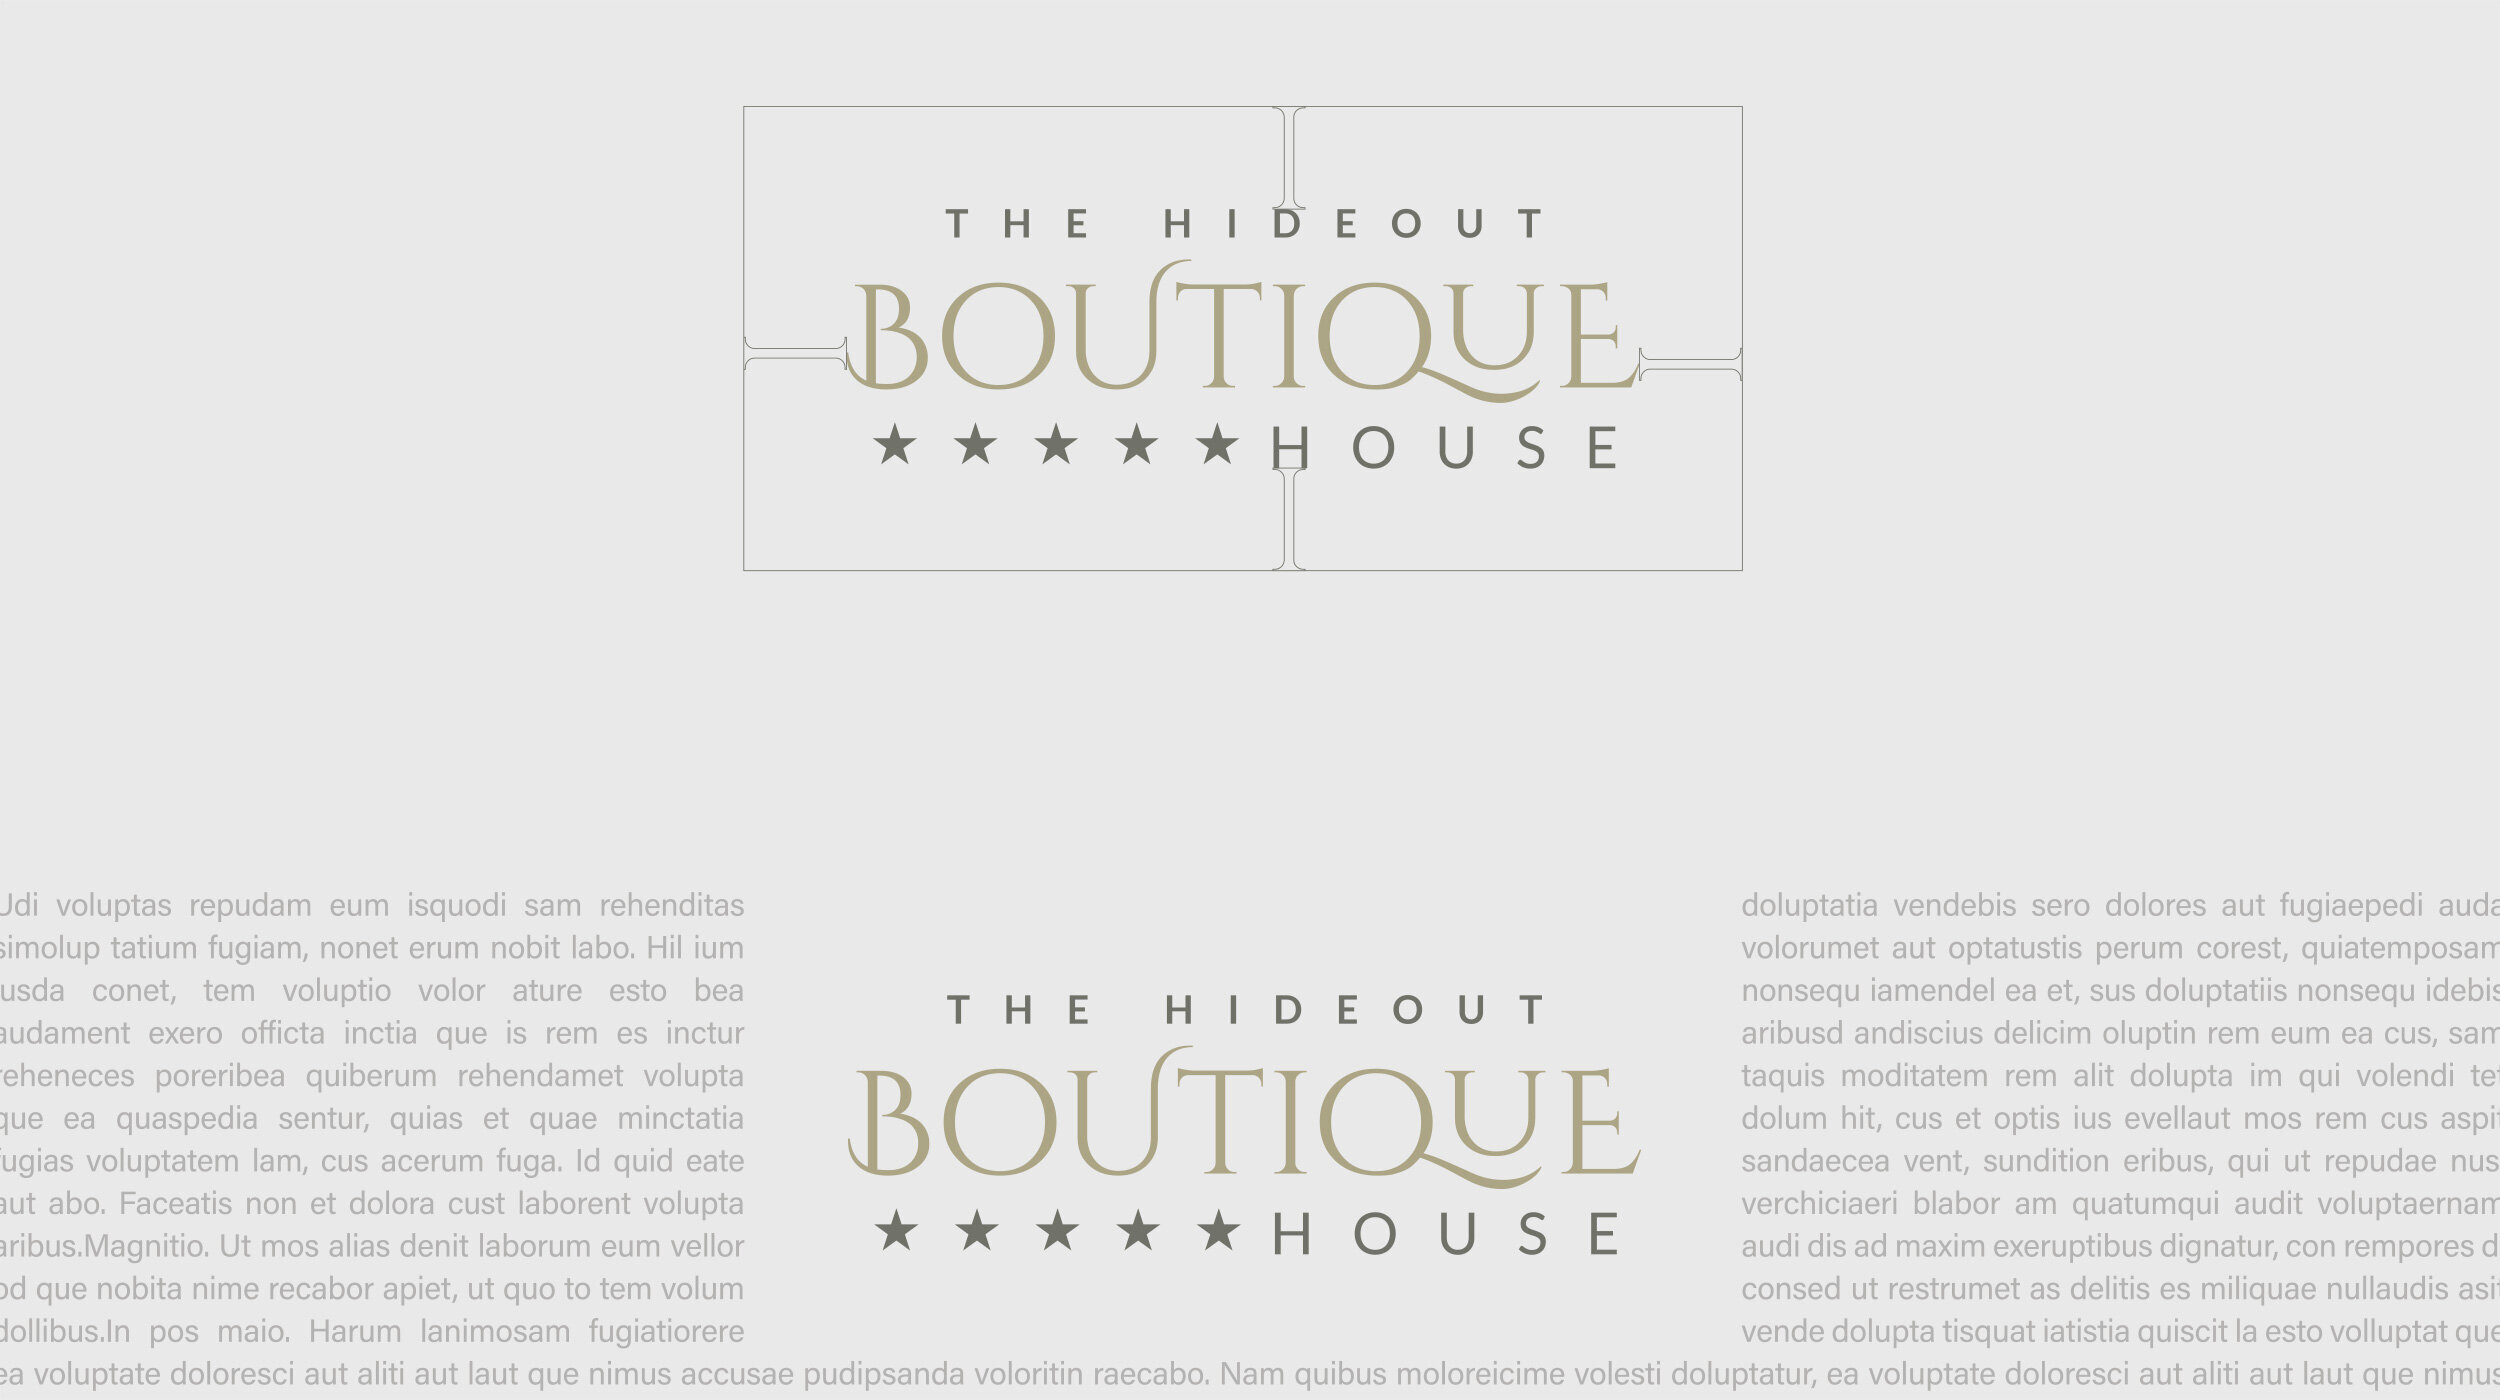 brand-strategy-design-the-hideout-boutique-house-adam-thorp-11.jpeg